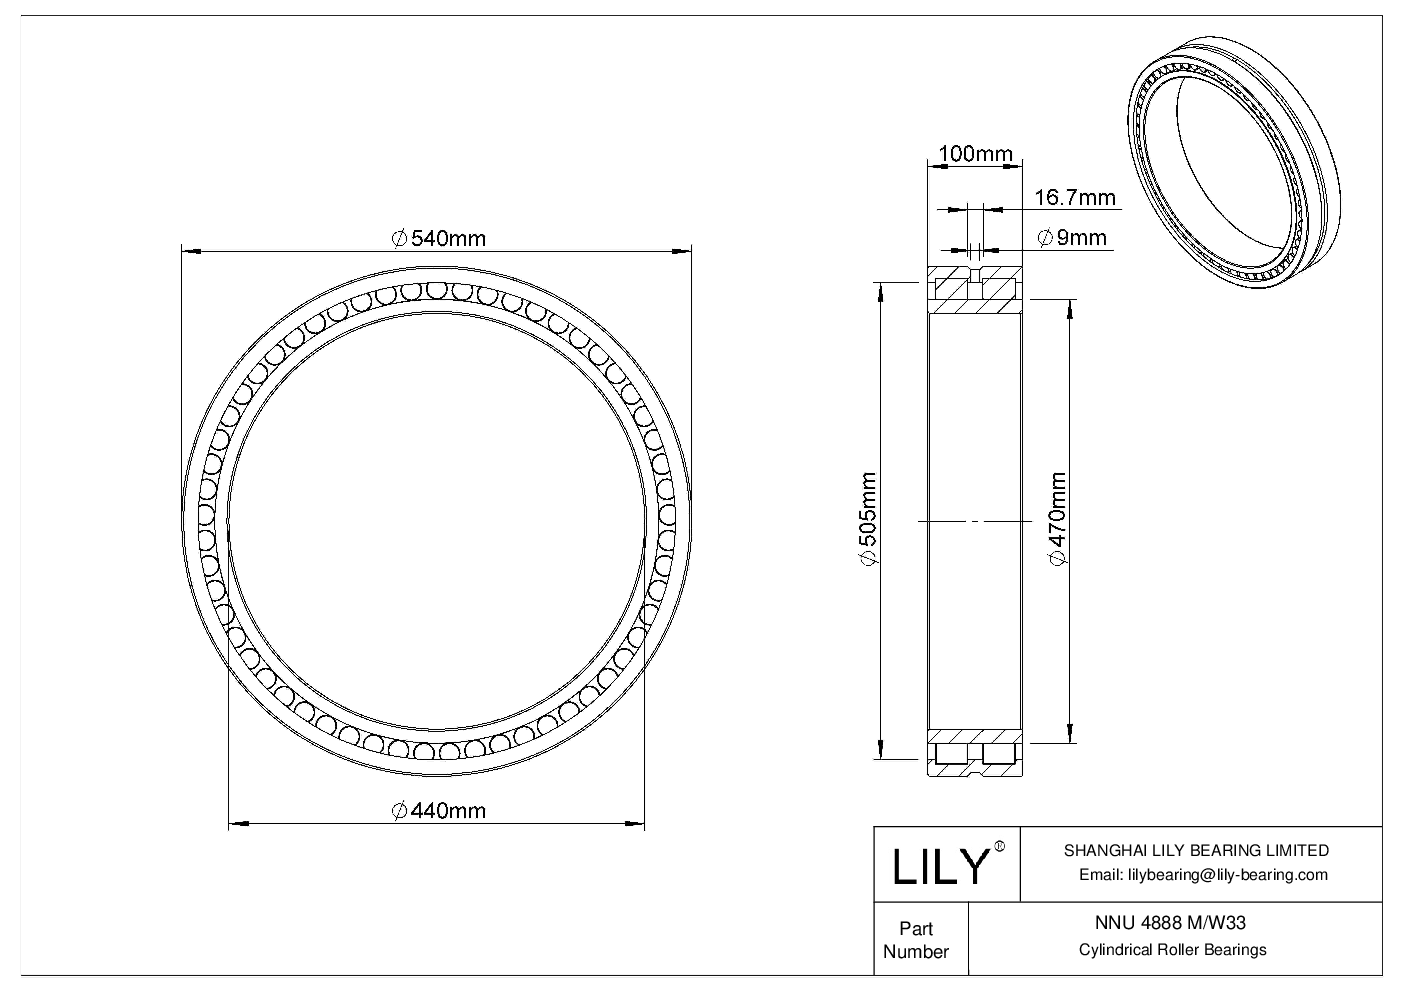 NNU 4888 M/W33 Double Row Cylindrical Roller Bearings cad drawing